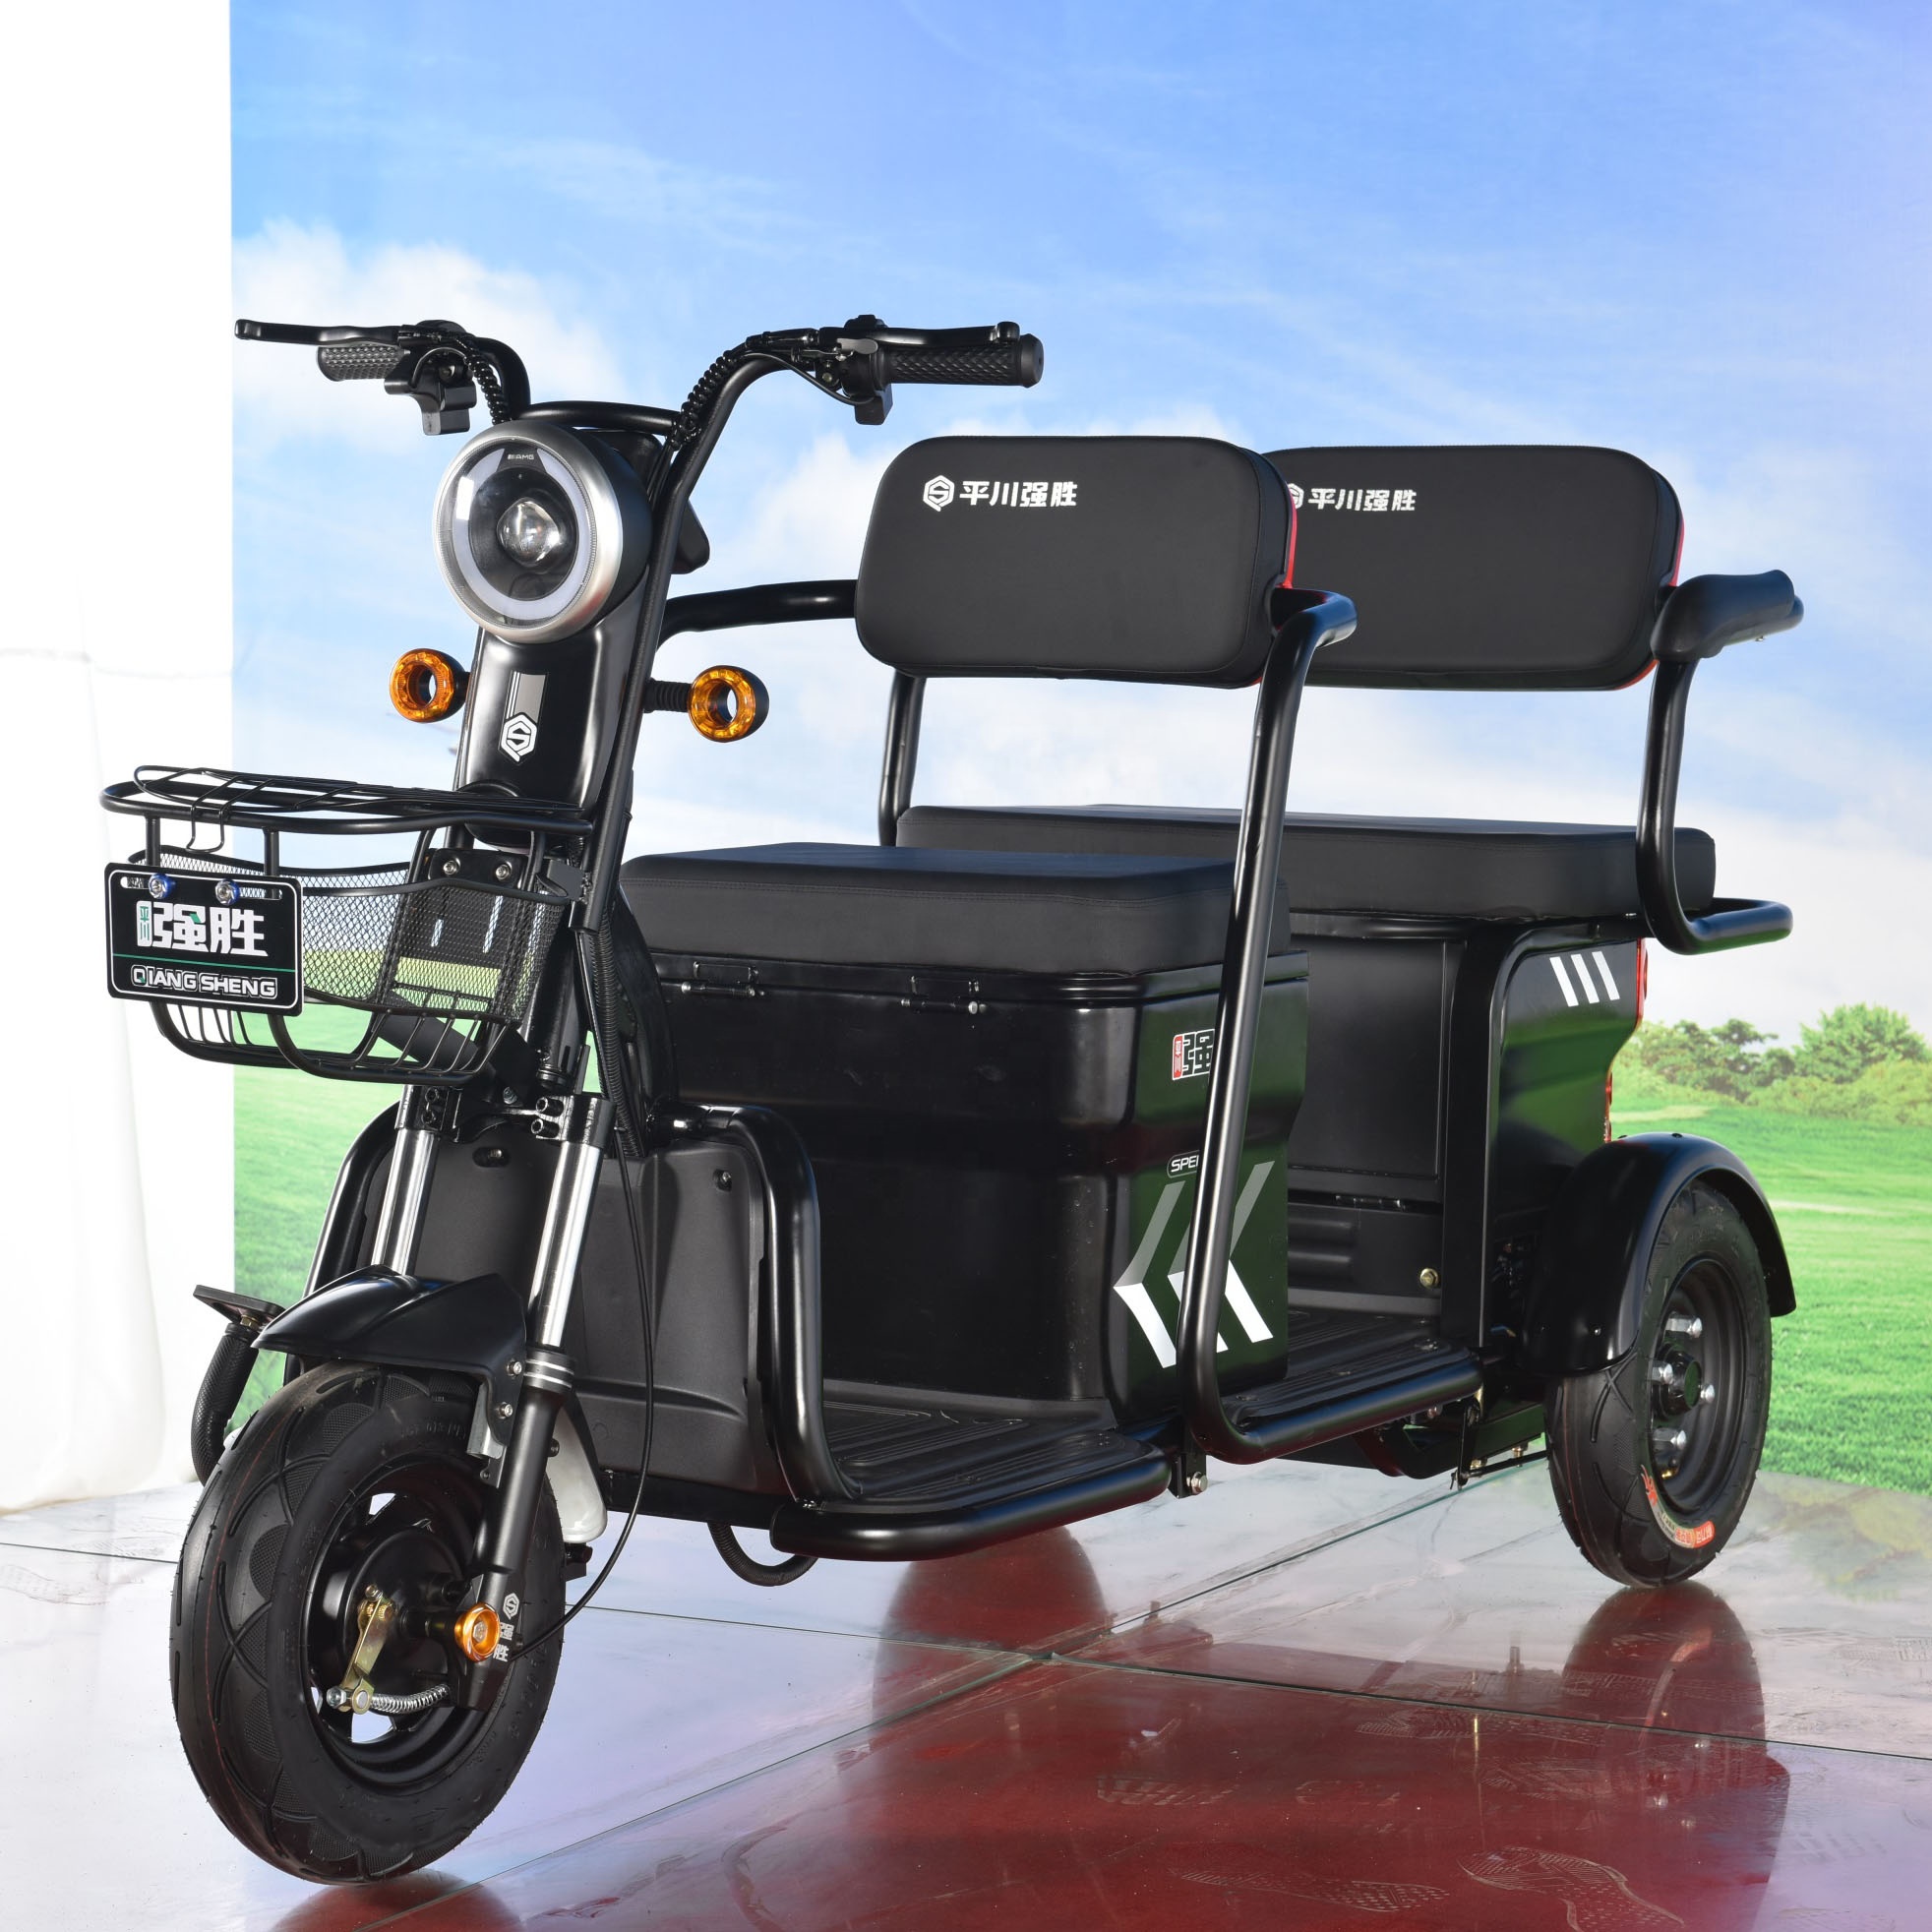 2021 hot sale Green eco friendly tricycle city bus e trike